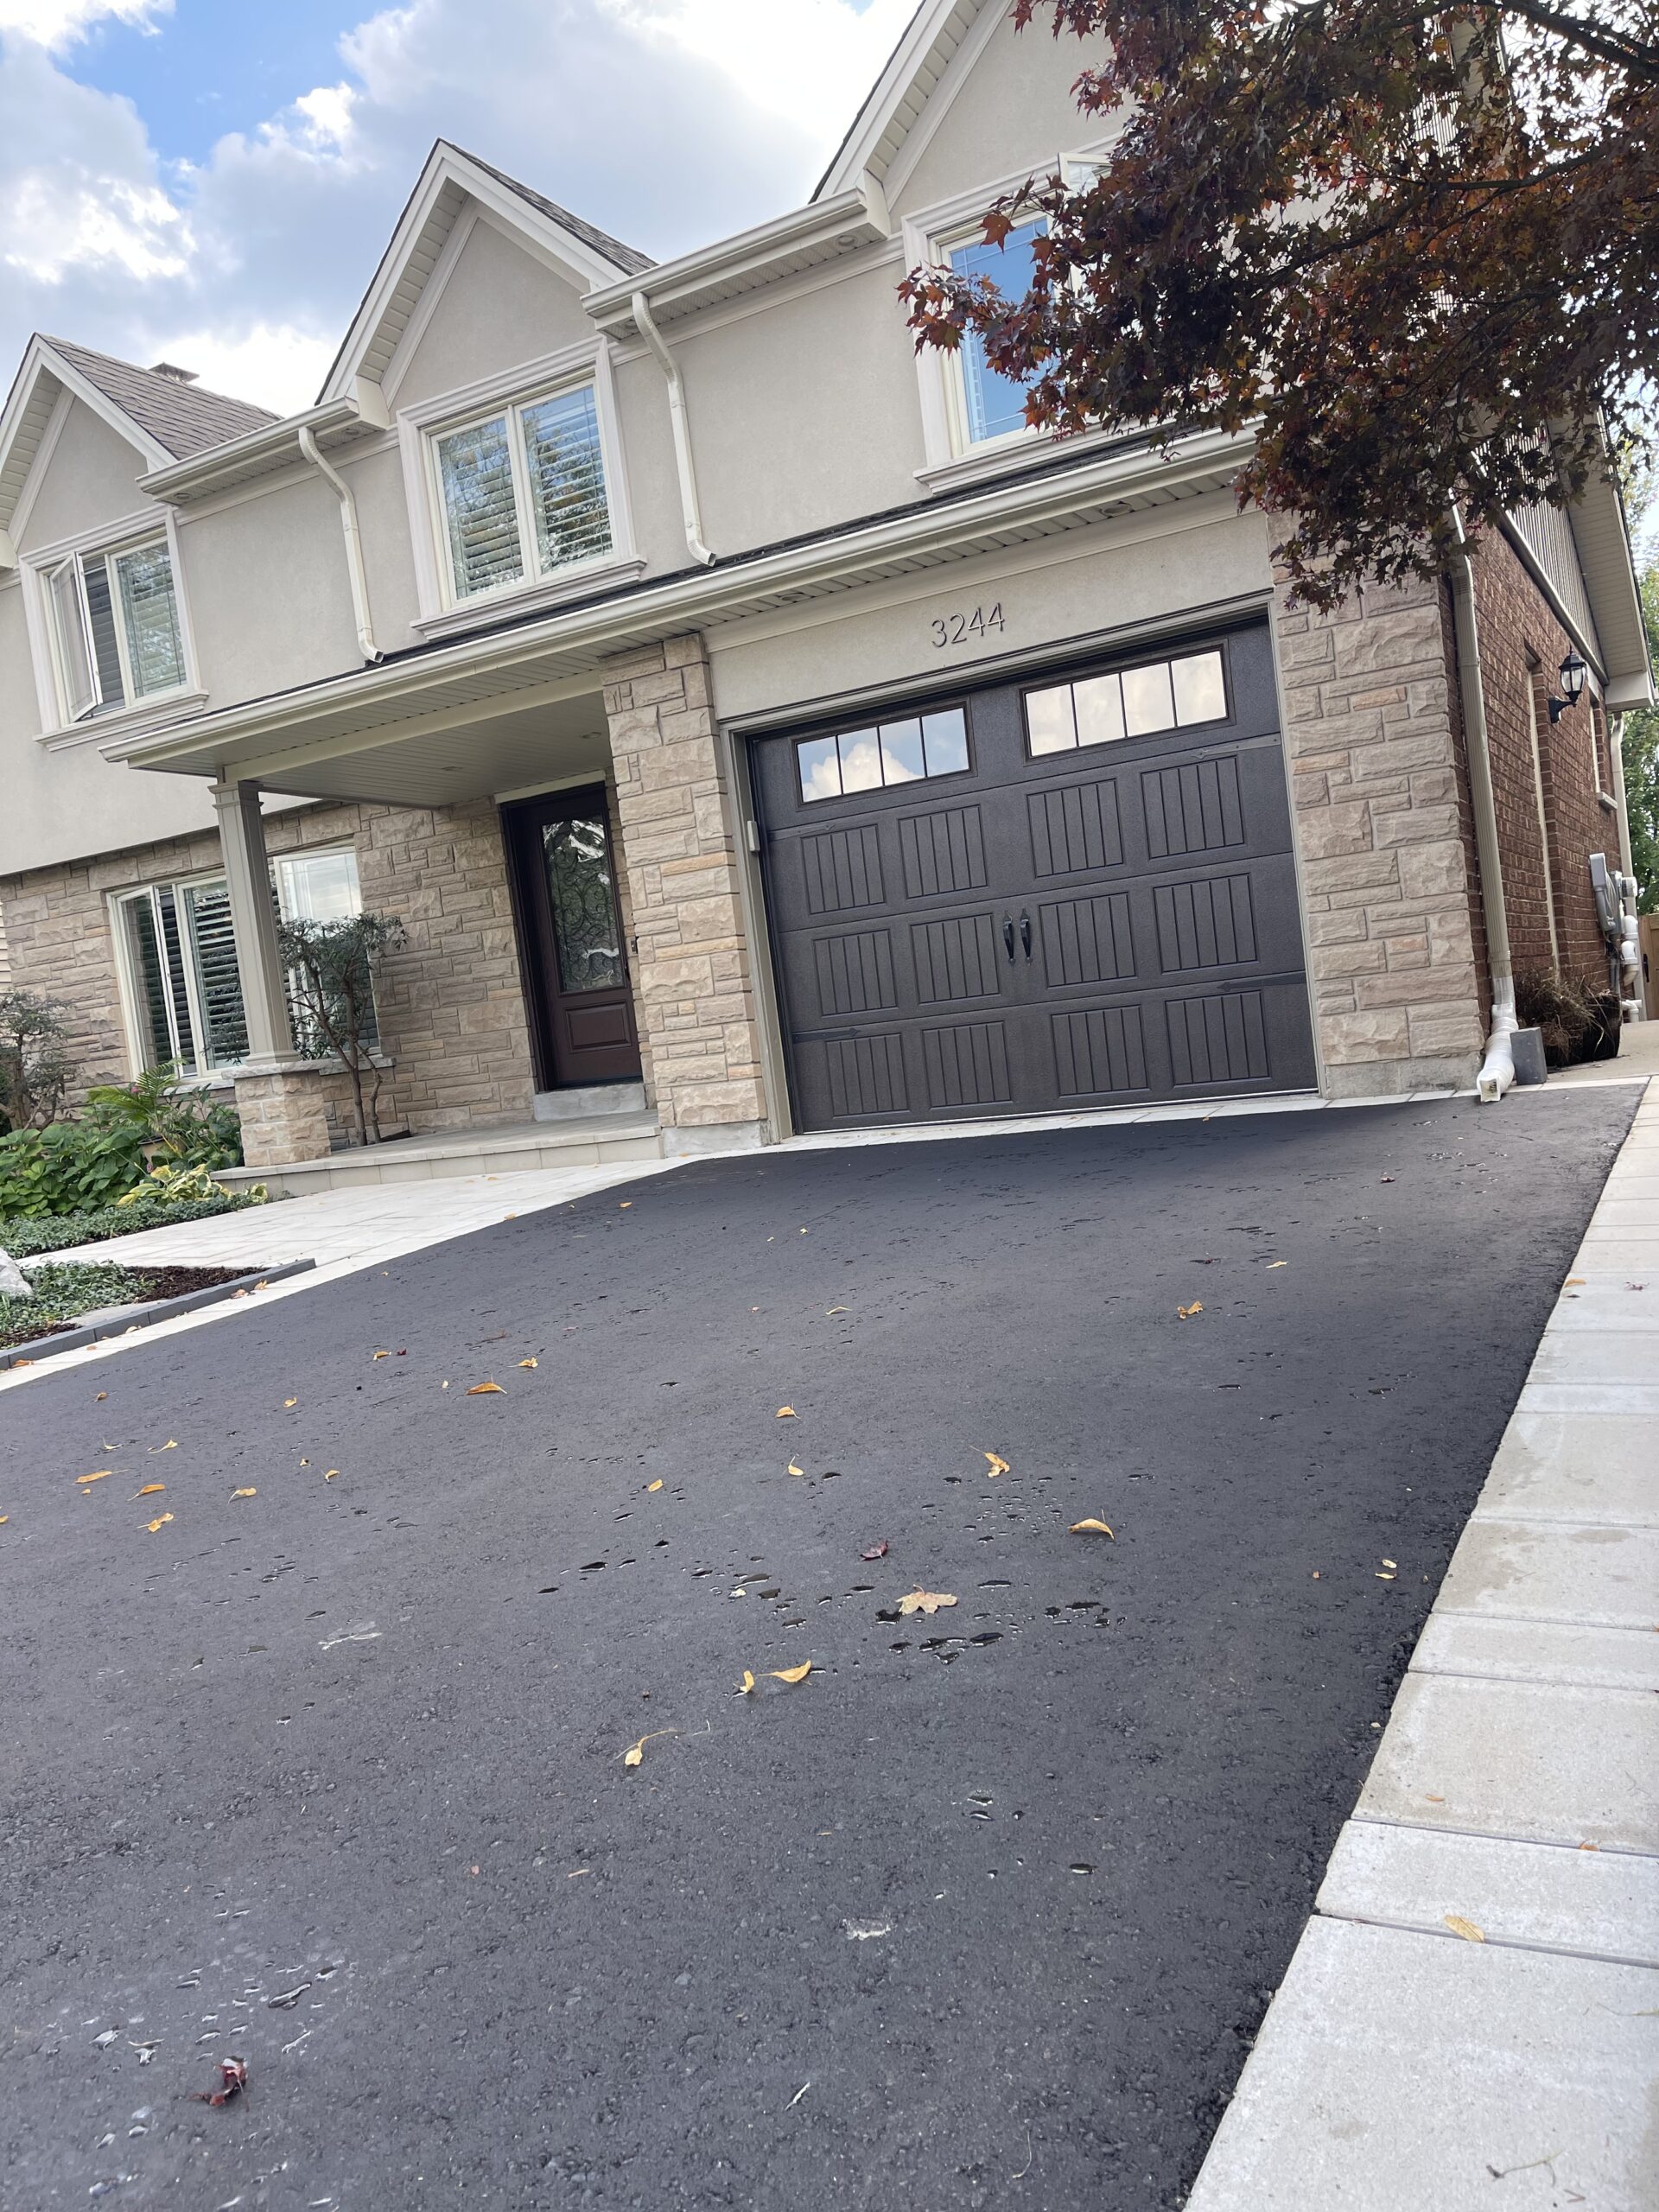 interlock driveway in the gta, #1 best certified pavers contractor milton. Interlocking Paver Walkway in Milton, ON custom paver patio expert in milton, ON. Driveway expert in milton ontario. outdoor living specialist in milton ON Pavers intallation company in milton, on. Paver patio & driveway pavers. Top-choice for all your outdoor living needs. Certified pavers contractor. milton ontario paver professional. Milton Stone, best pavers contractor in oakville ON, oakville driveway pavers installation company, deriveway repair servies in oakville ontario, techo bloc installer in oakville, milton stone, custom paver driveway expert oakville, driveway extension milton ontario, best interlock company in oakville, best interlock contractor in milton on,, custom pergola expert in milton ontario, pergola construction oakville, custom pergola company in milton, pergola builer in oakville, best pavers contractor in oakville ON, oakville driveway pavers installation company, deriveway repair servies in oakville ontario, techo bloc installer in oakville, milton stone, custom paver driveway expert oakville, driveway extension milton ontario, best interlock company in oakville, best interlock contractor in milton on,, commercial parking lot repairs in GTA, parking lot replacement expert, property services in GTA toronto, property maintenance in GTA, asphalt parking lot repair services in greater toronto area, asphalt paving driveway repair, asphalt driveway repair expert in GTA, GTA asphalt paving for parking lots, parking lot maintenance repair services, property services in GTA, asphalt paving contractor in GTA, interlock driveway repair services in GTA, custom pergola expert in milton ontario, pergola construction oakville, custom pergola company in milton, pergola builer in oakville, best pavers contractor in oakville ON, oakville driveway pavers installation company, deriveway repair servies in oakville ontario, techo bloc installer in oakville, milton stone, custom paver driveway expert oakville, driveway extension milton ontario, best interlock company in oakville, best interlock contractor in milton on,